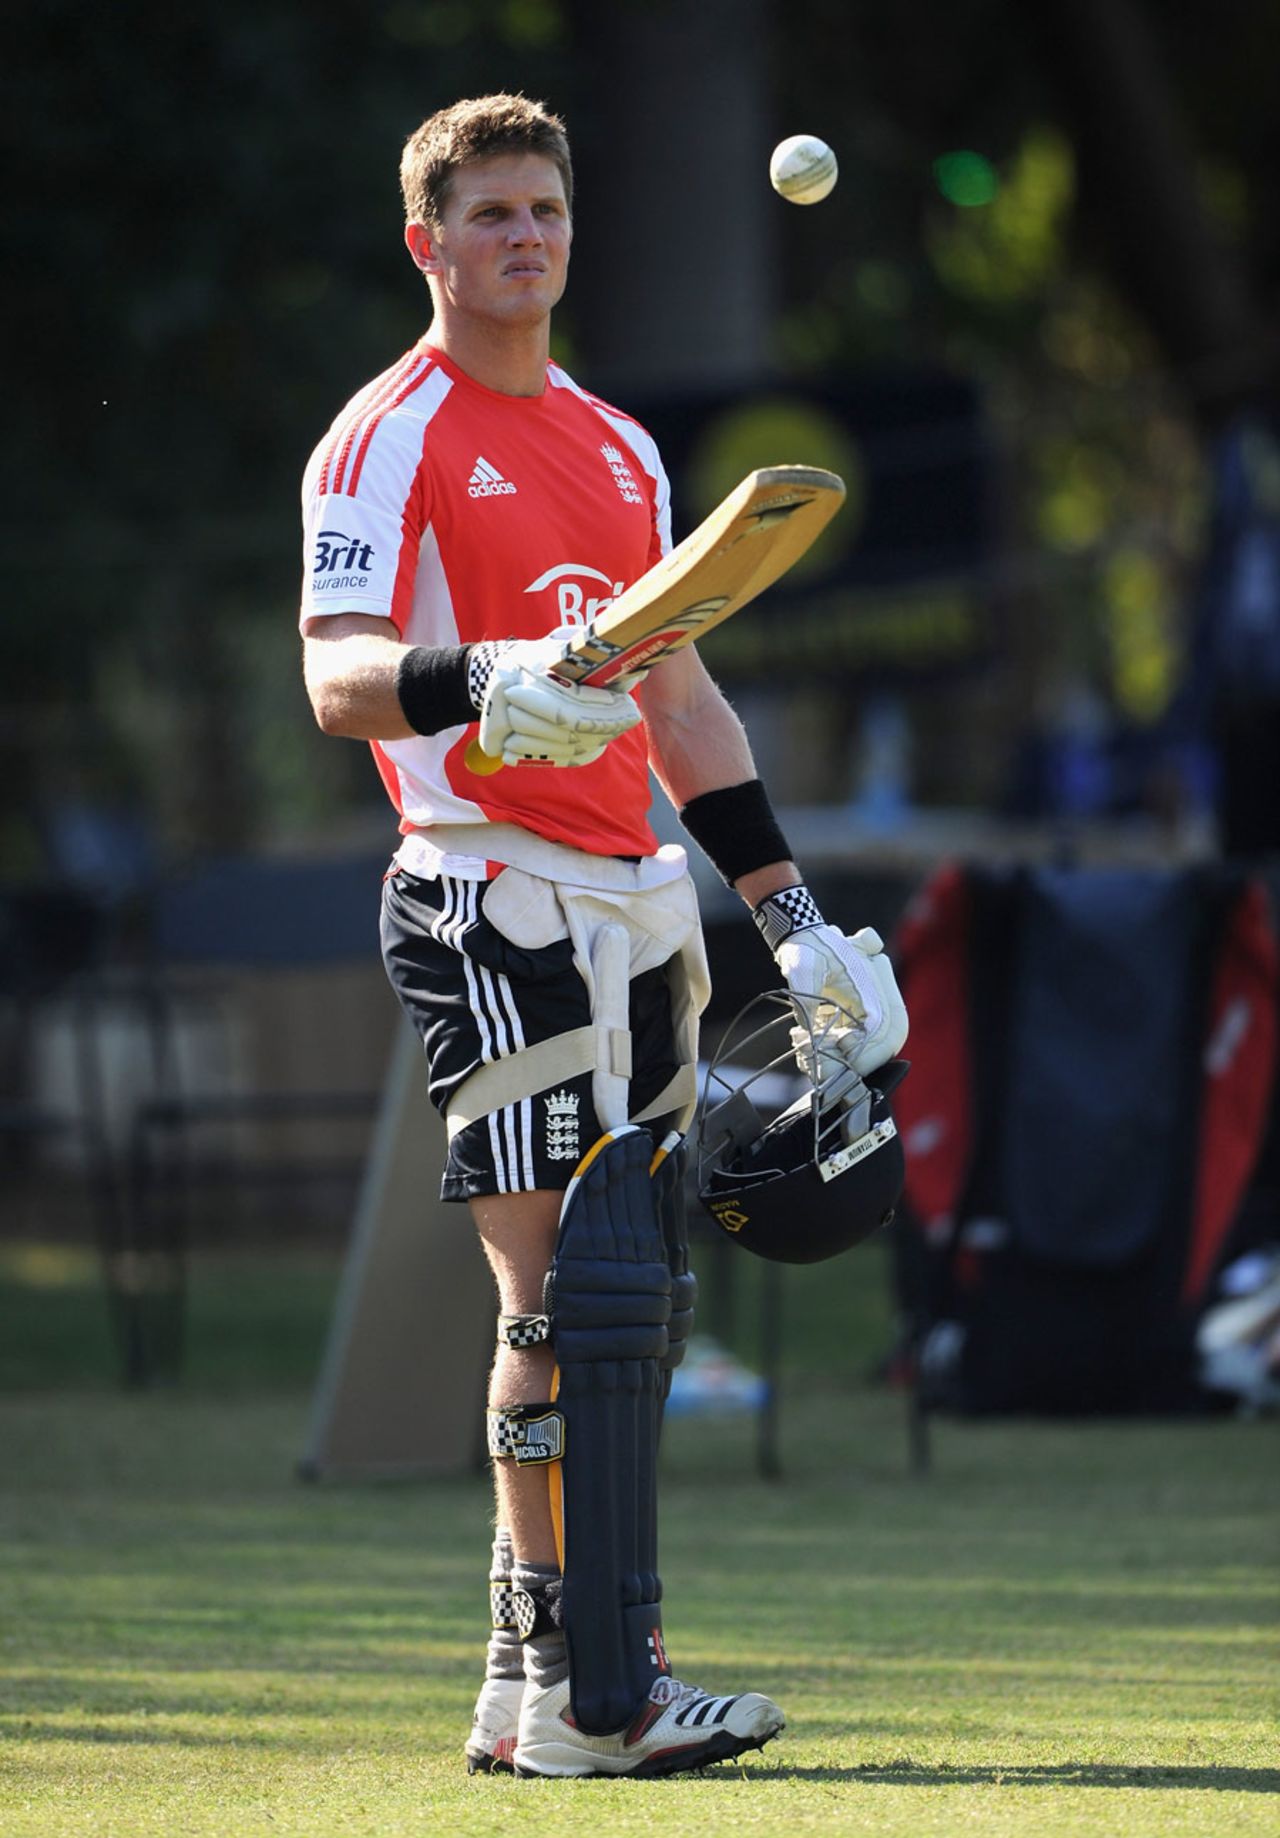 Stuart Meaker waits for his opportunity in the nets, Mohali, October 19, 2011